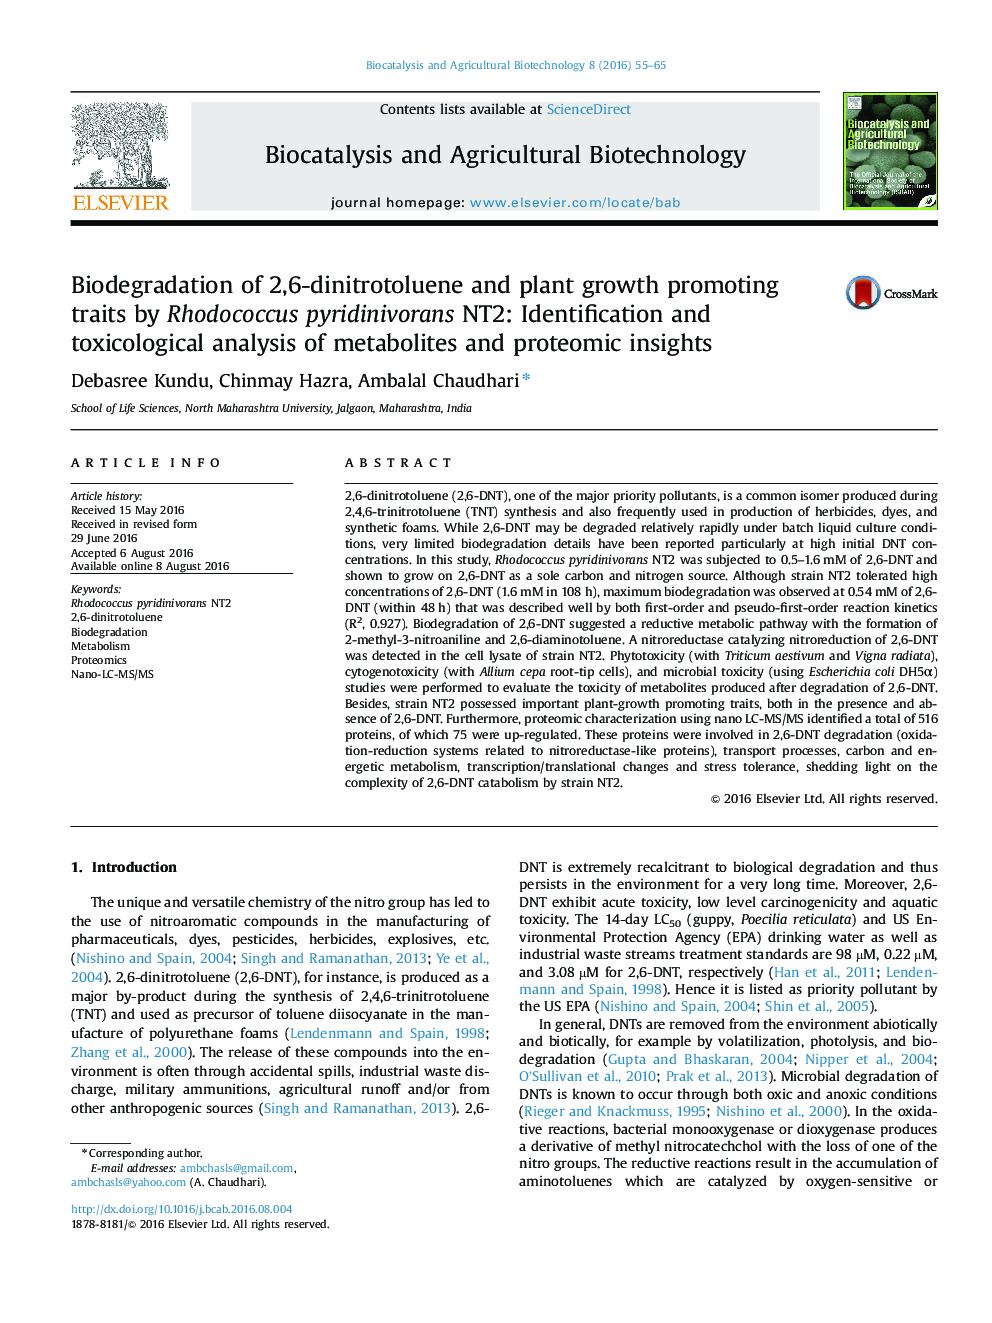 Biodegradation of 2,6-dinitrotoluene and plant growth promoting traits by Rhodococcus pyridinivorans NT2: Identification and toxicological analysis of metabolites and proteomic insights